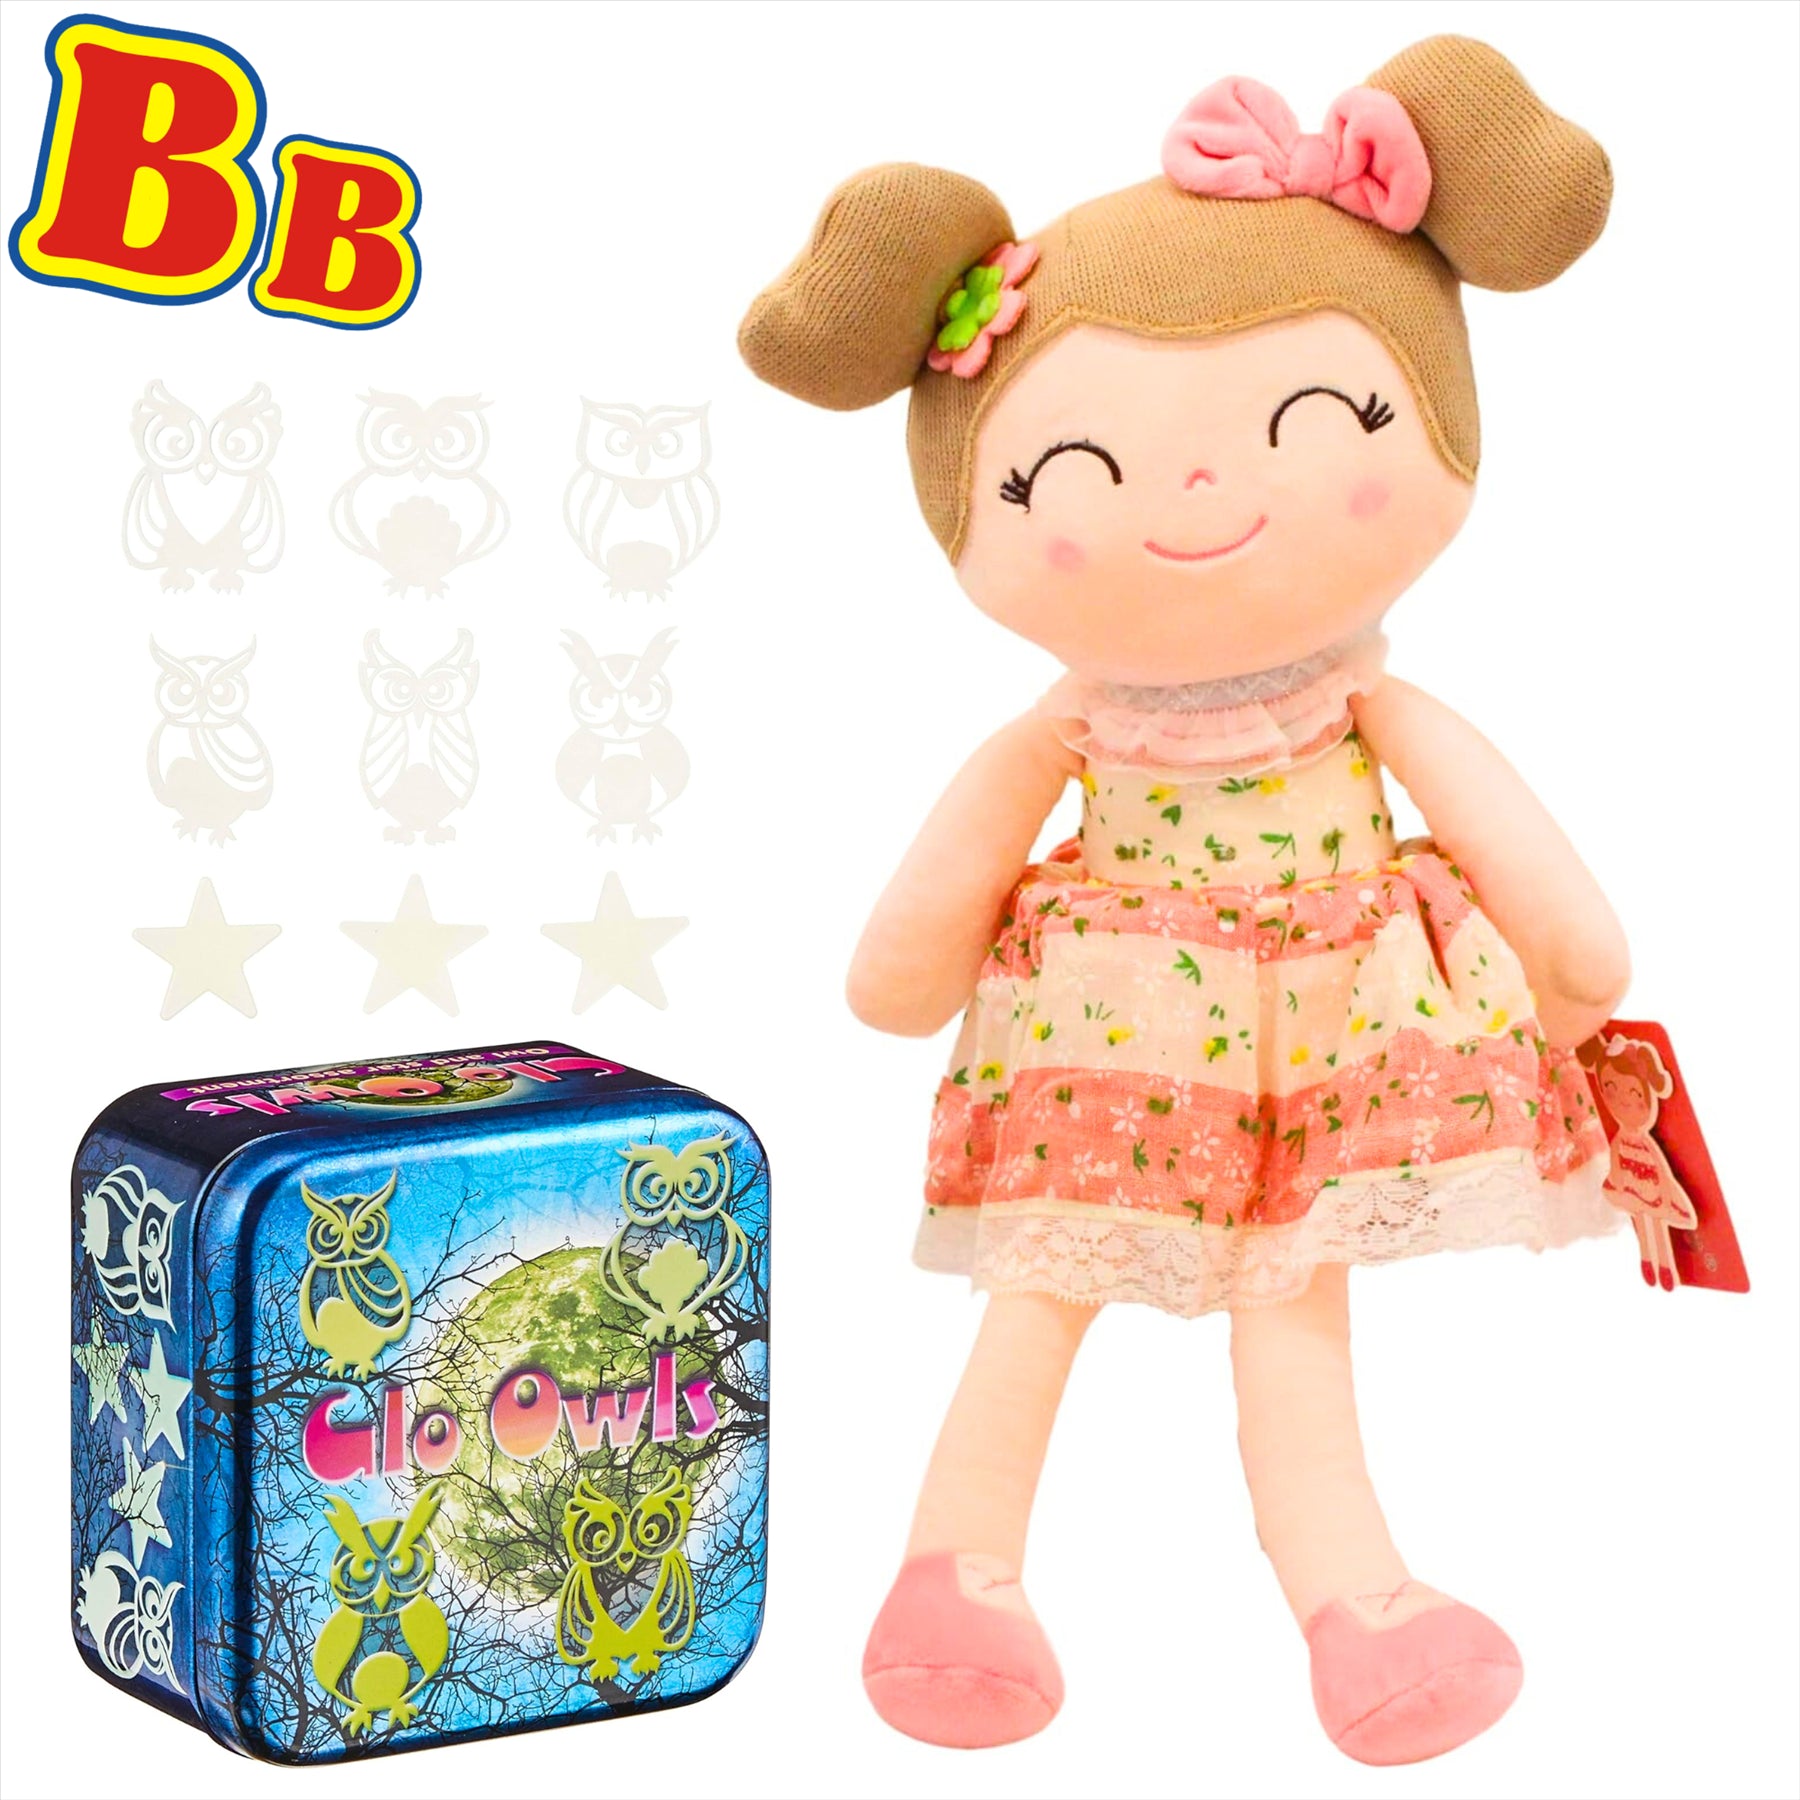 Gloveleya Super Soft Embroidered Pink Spring 40cm Plush Doll with 42 Glow in the Dark Owls and Stars